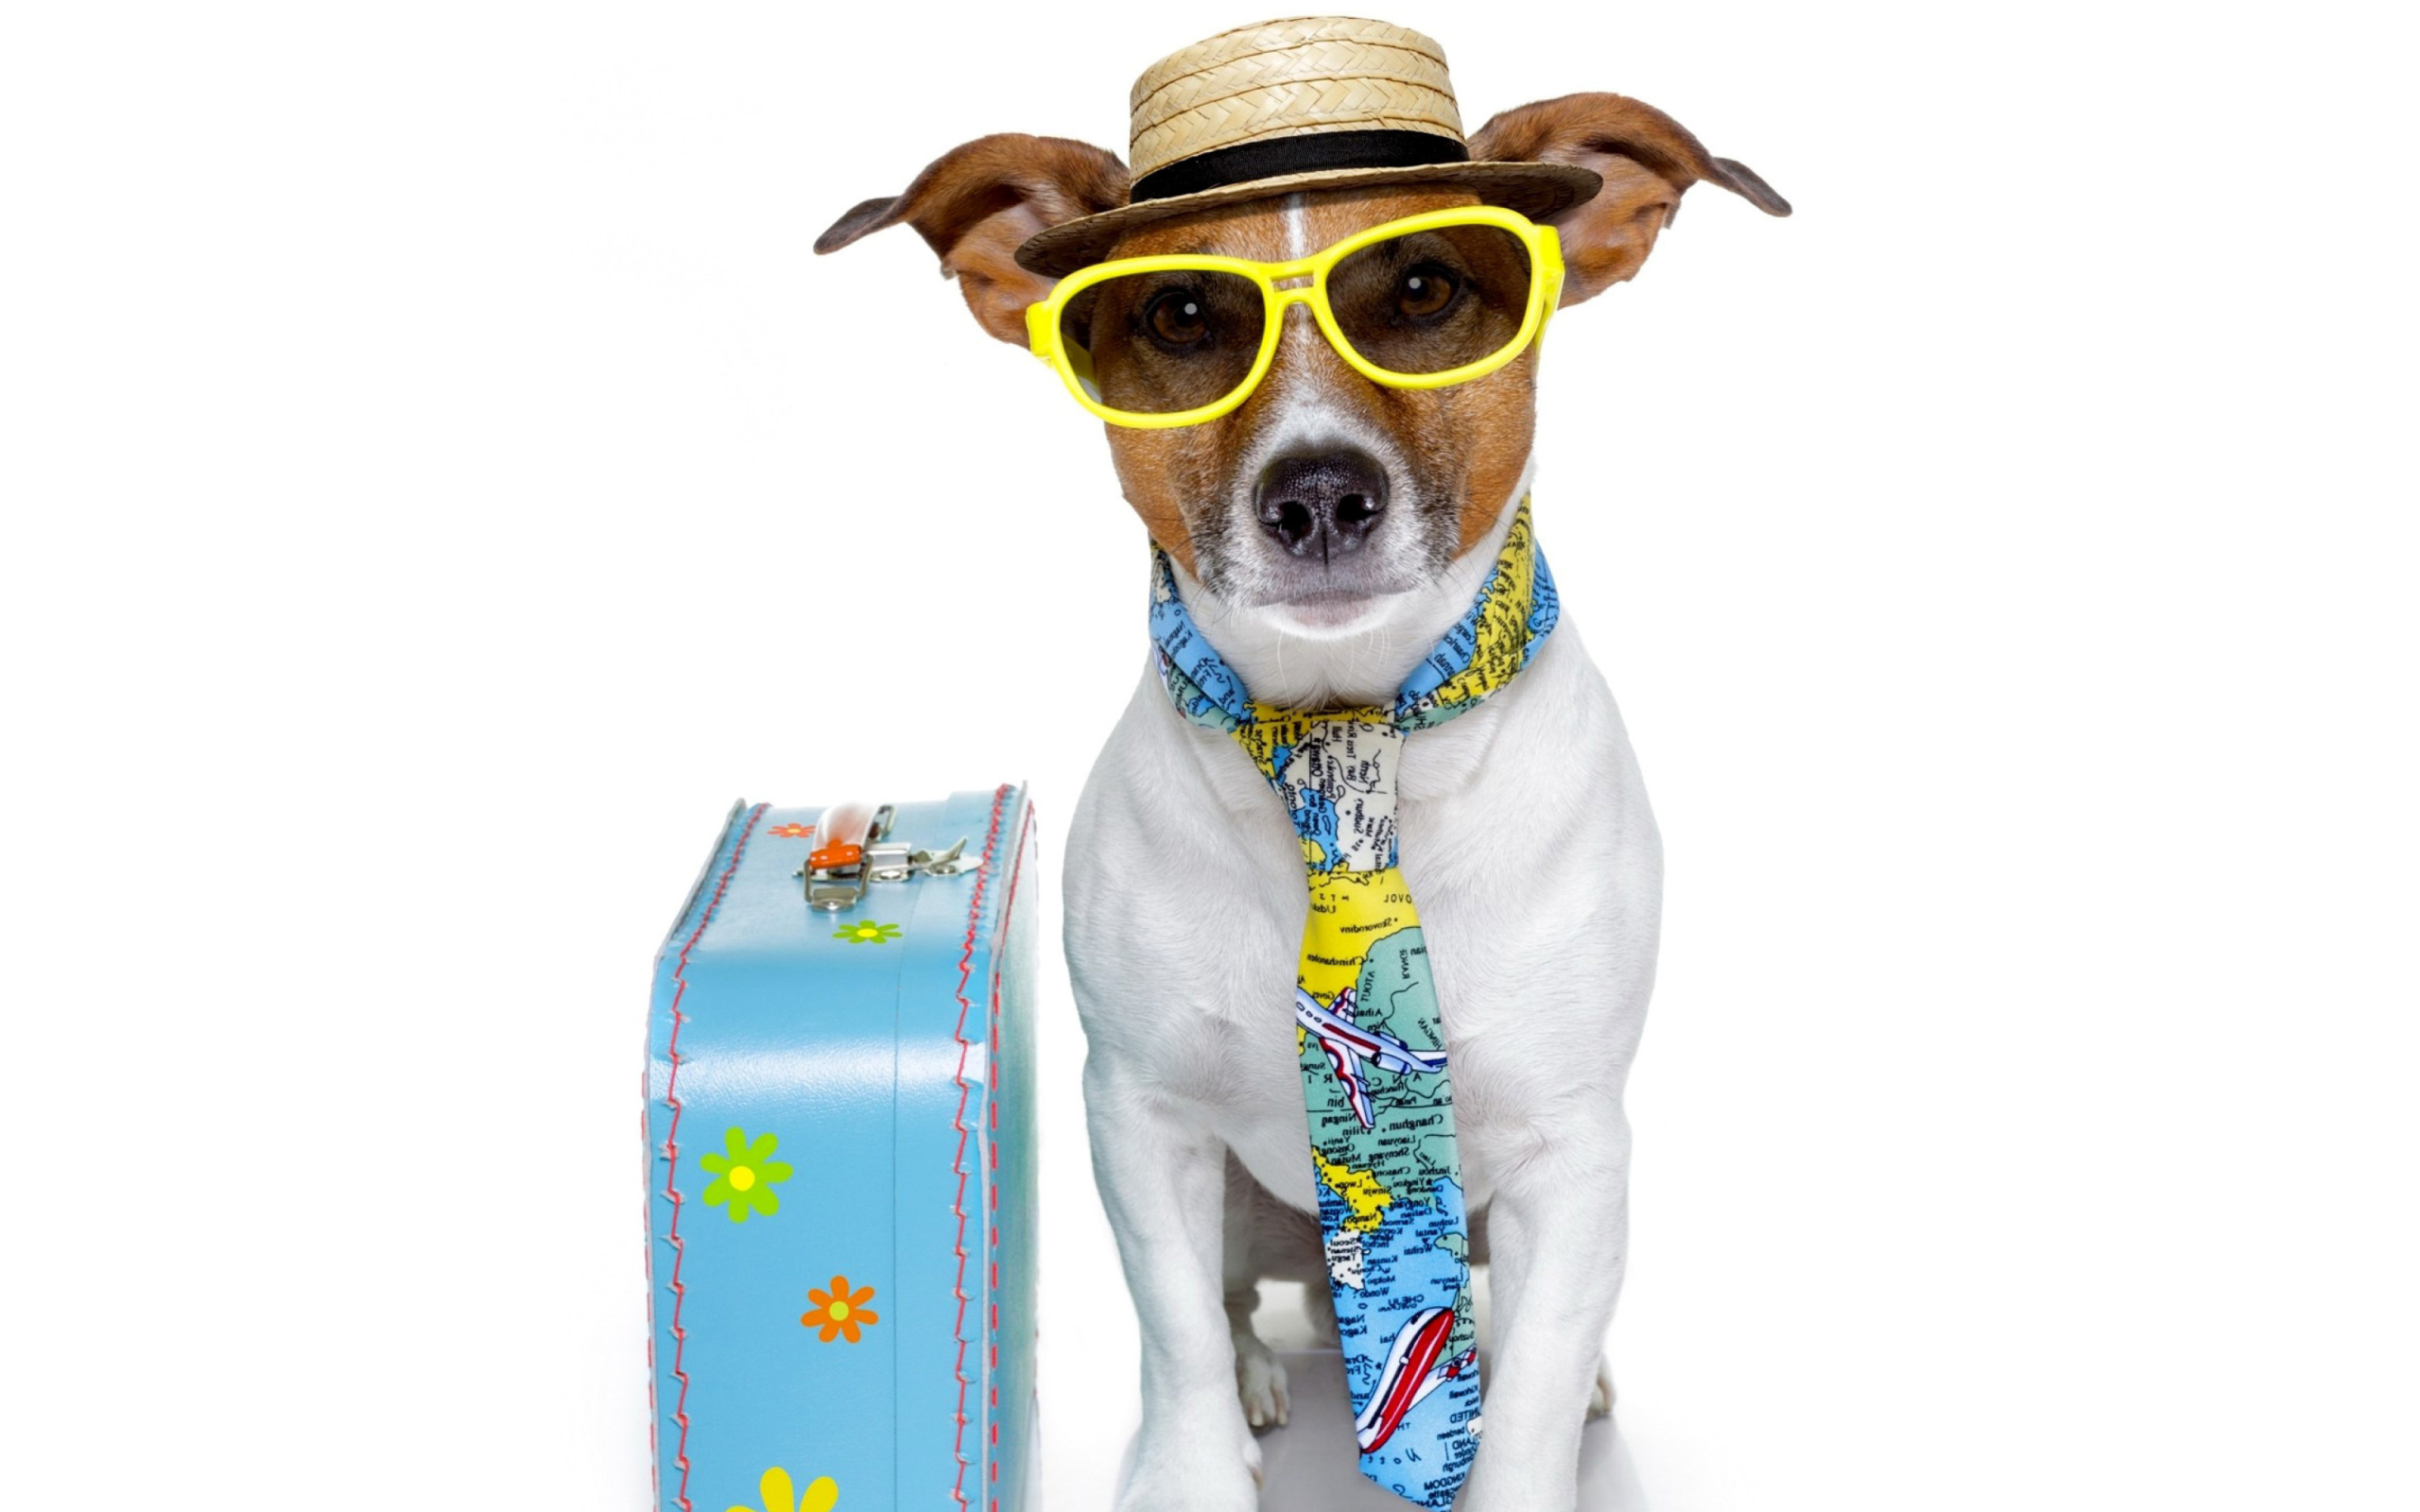 Funny dog going on holiday wallpaper 2560x1600